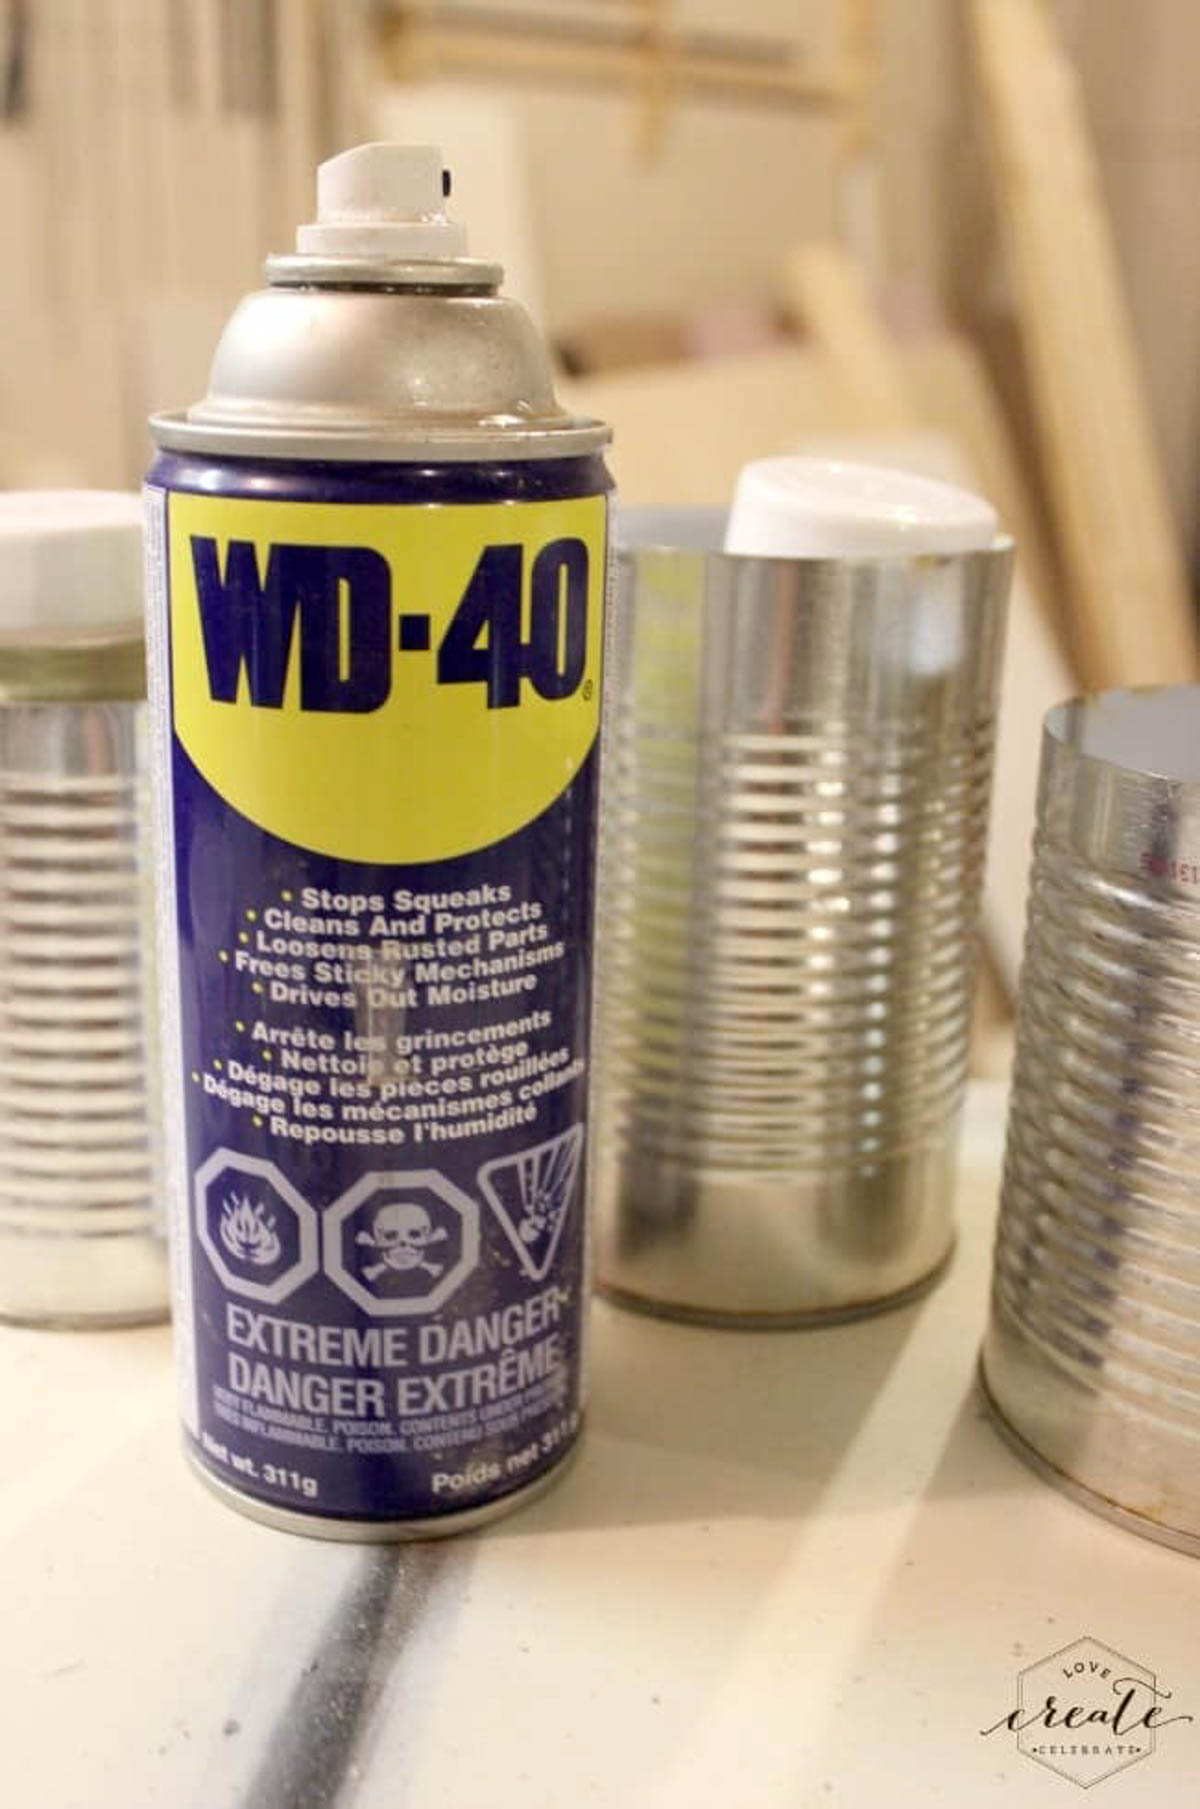 Can of WD-40 used to lubricate the tin can for easy removal